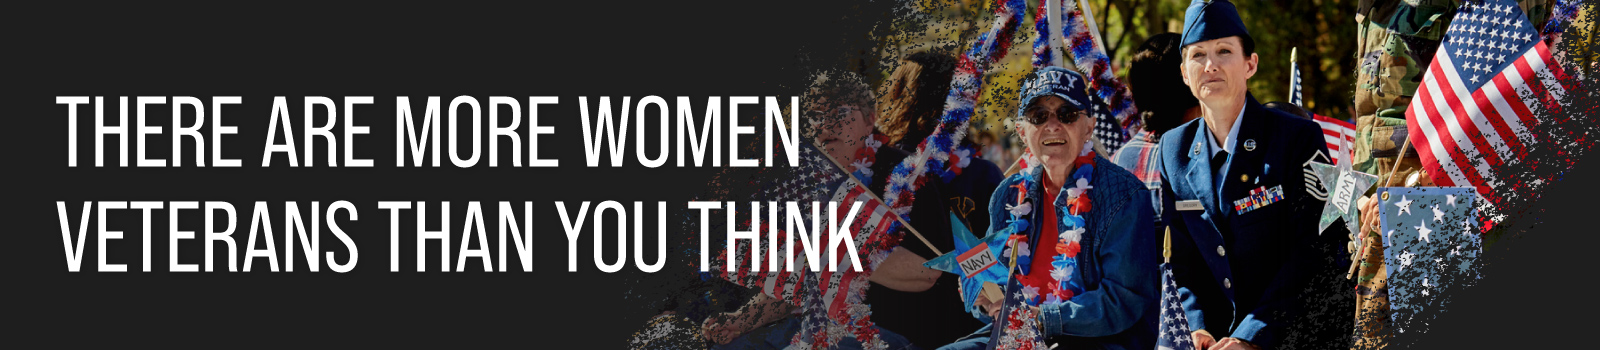 There Are More Women Veterans Than You Think